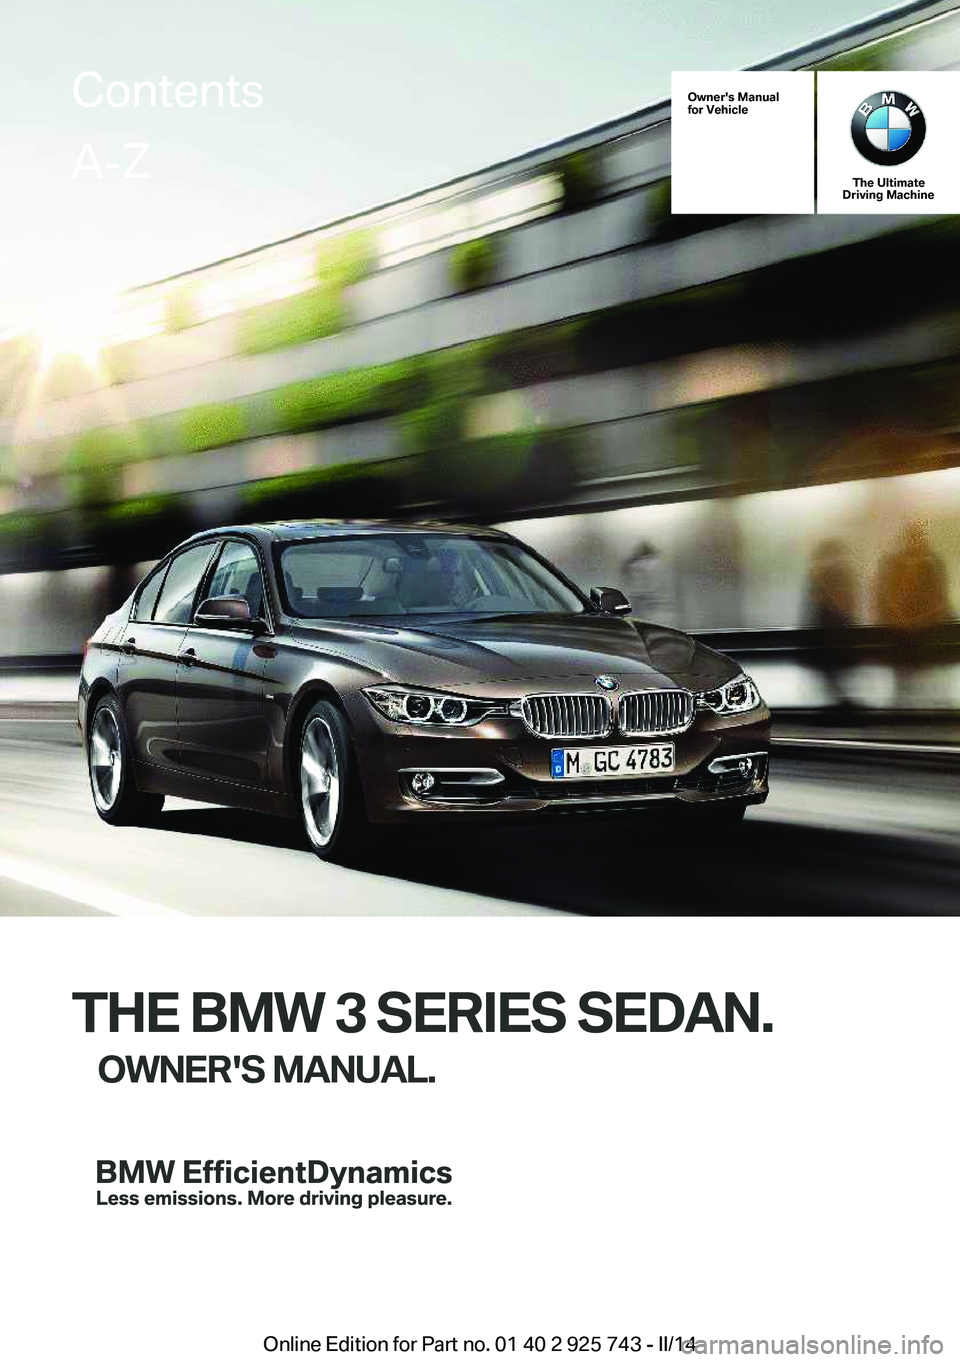 BMW 328D XDRIVE 2014  Owners Manual Owner's Manual
for Vehicle
The Ultimate
Driving Machine
THE BMW 3 SERIES SEDAN.
OWNER'S MANUAL.
ContentsA-Z
Online Edition for Part no. 01 40 2 925 743 - II/14   